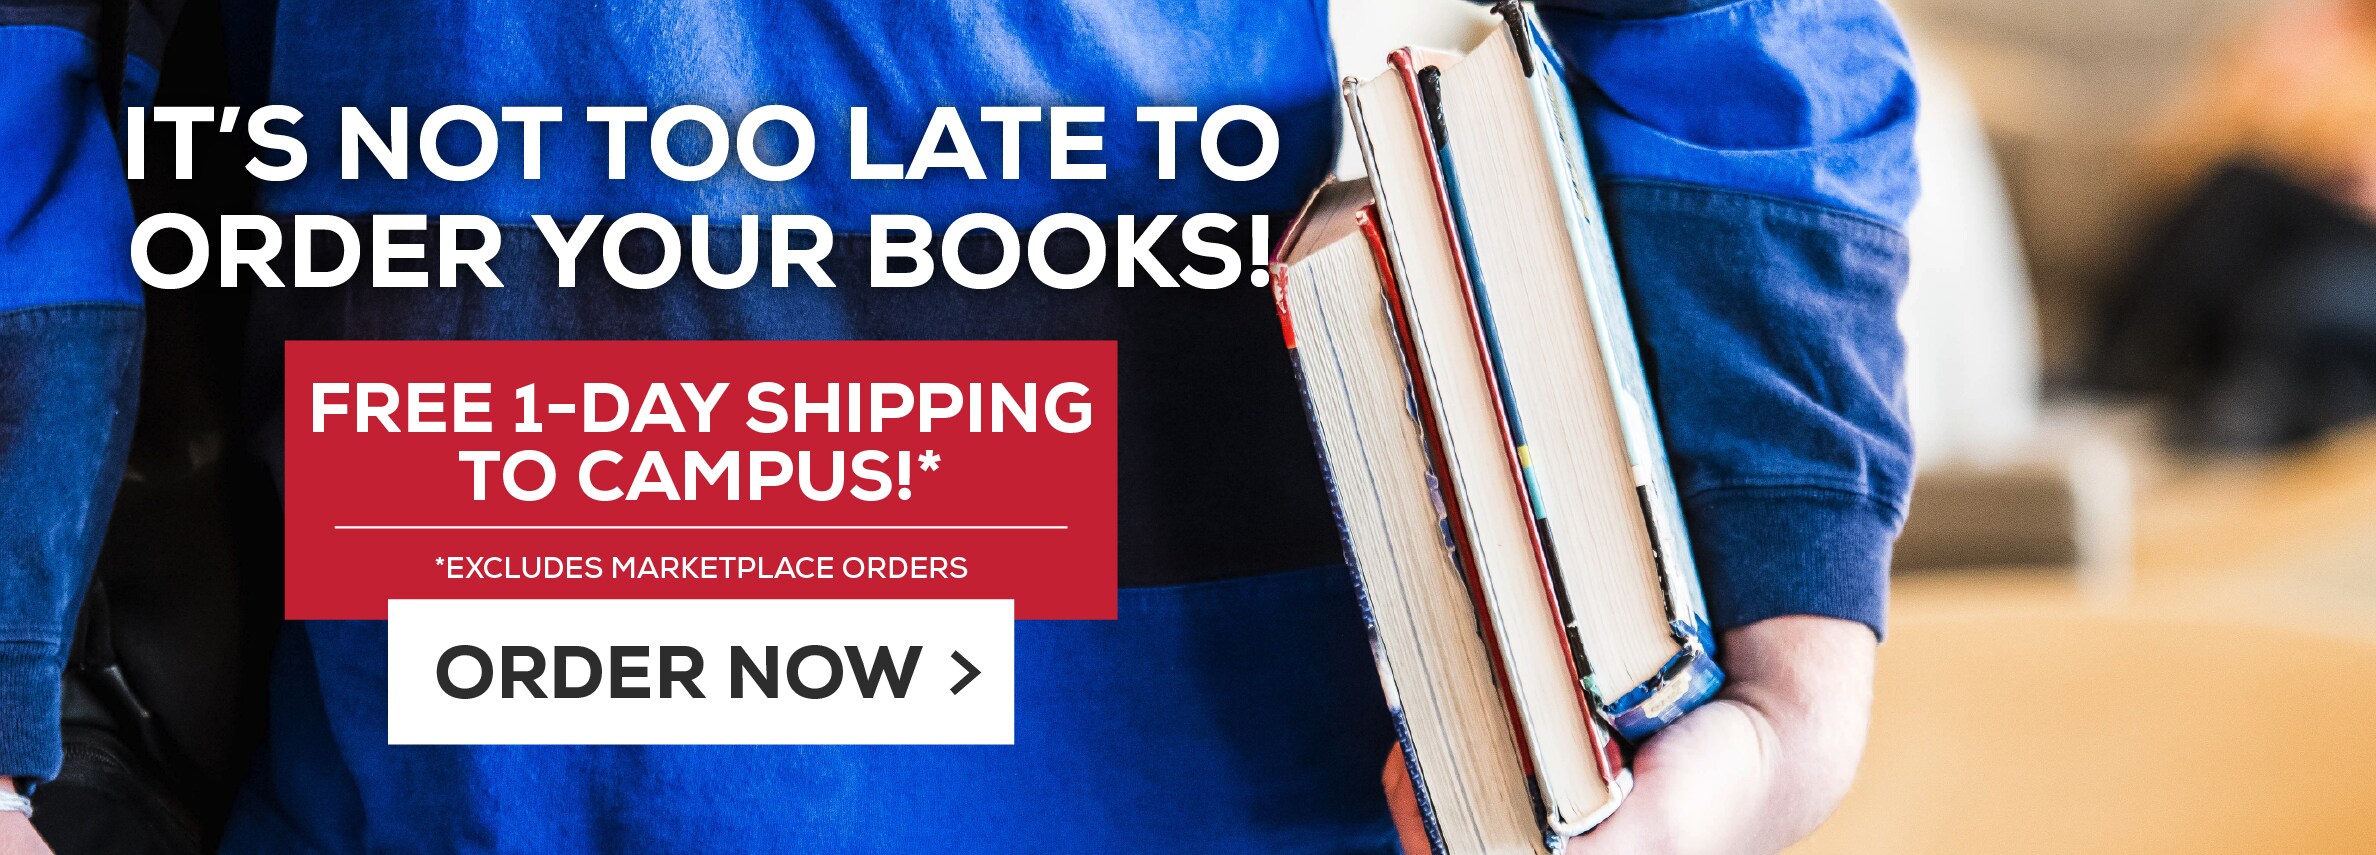 IT'S NOT TOO LATE TO ORDER YOUR BOOKS! FREE 1-DAY SHIPPING TO CAMPUS!* *EXCLUDES MARKETPLACE ORDERS ORDER NOW: